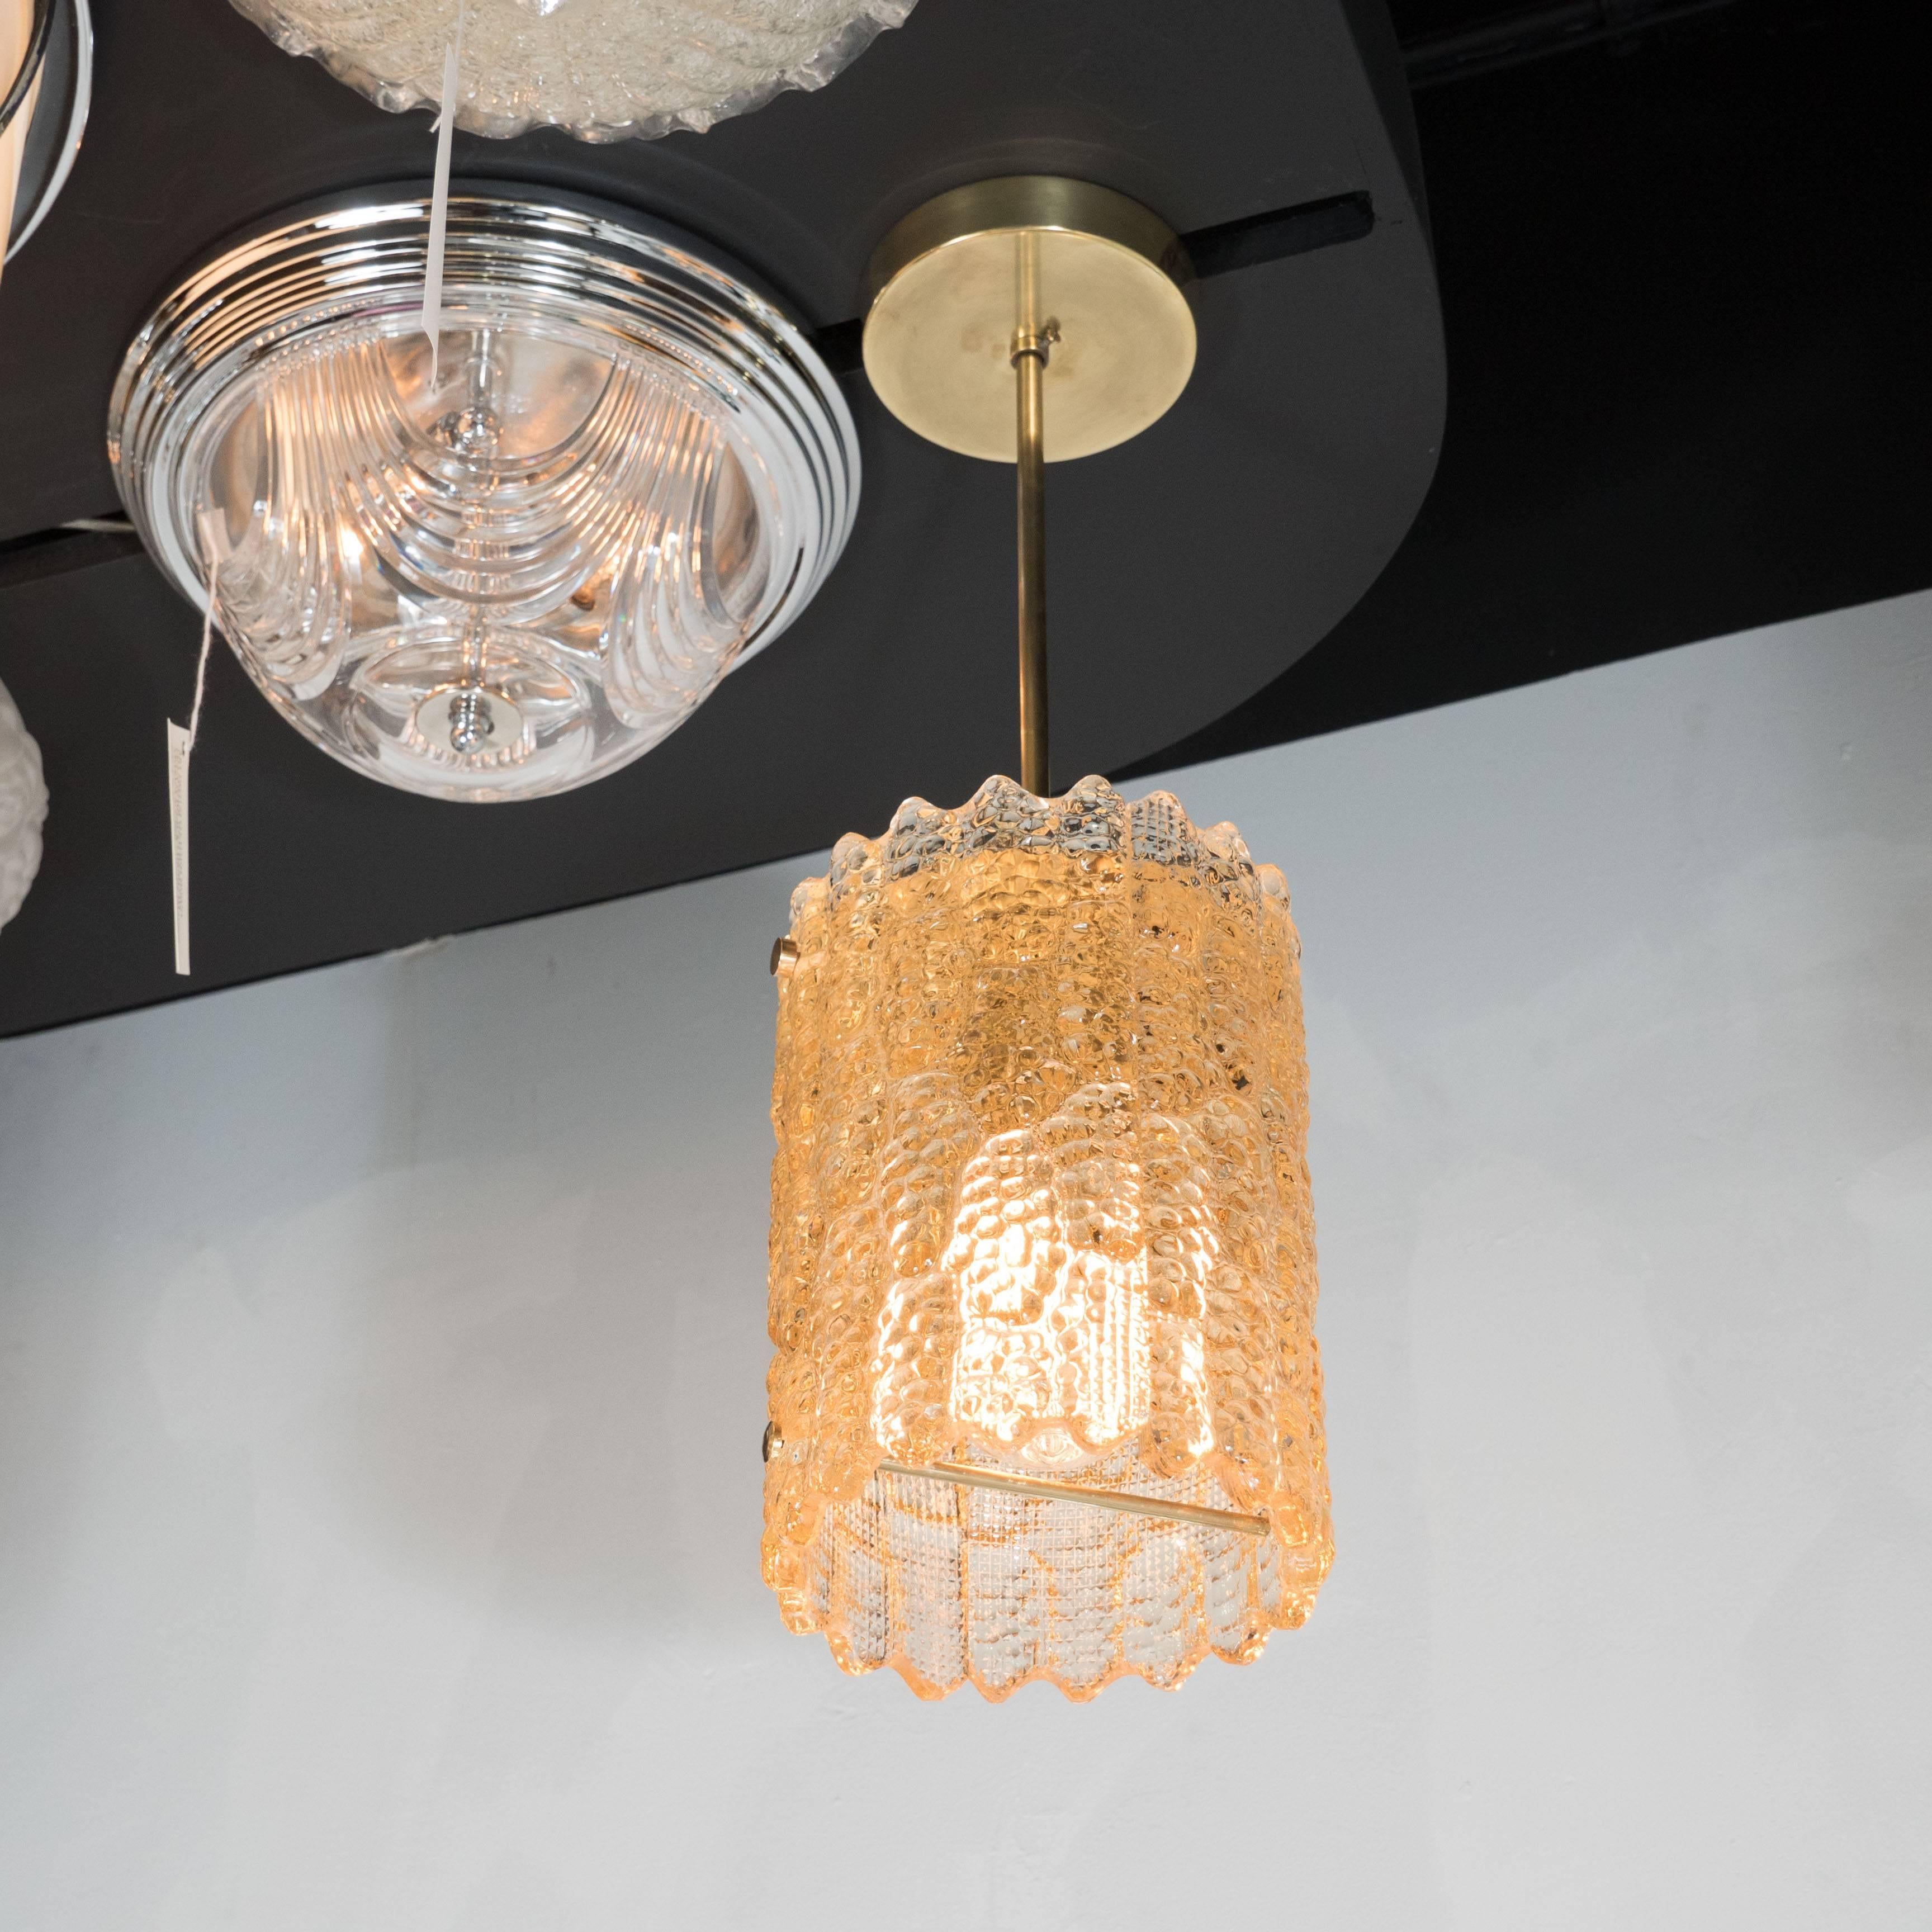 An elegant Mid-Century Modernist textured amber glass pendant with polished brass fittings by Carl Fagerlund for Orrefors of Sweden. A polished brass canopy holds a rod which supports a cylindrical form glass shade with organic textural elements and